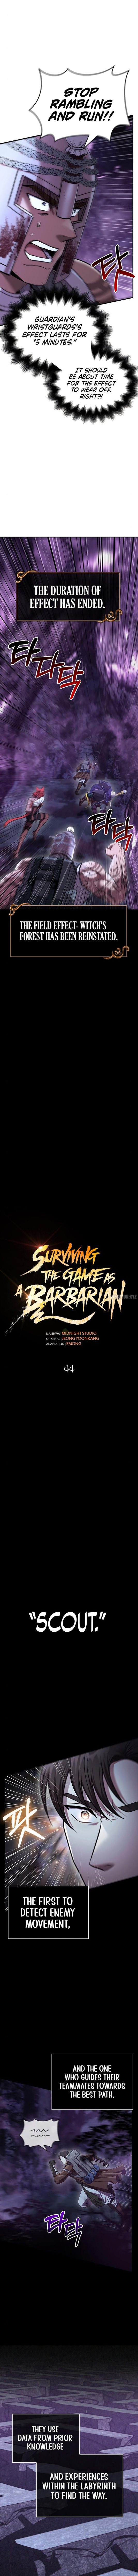 surviving-the-game-as-a-barbarian-chap-44-3